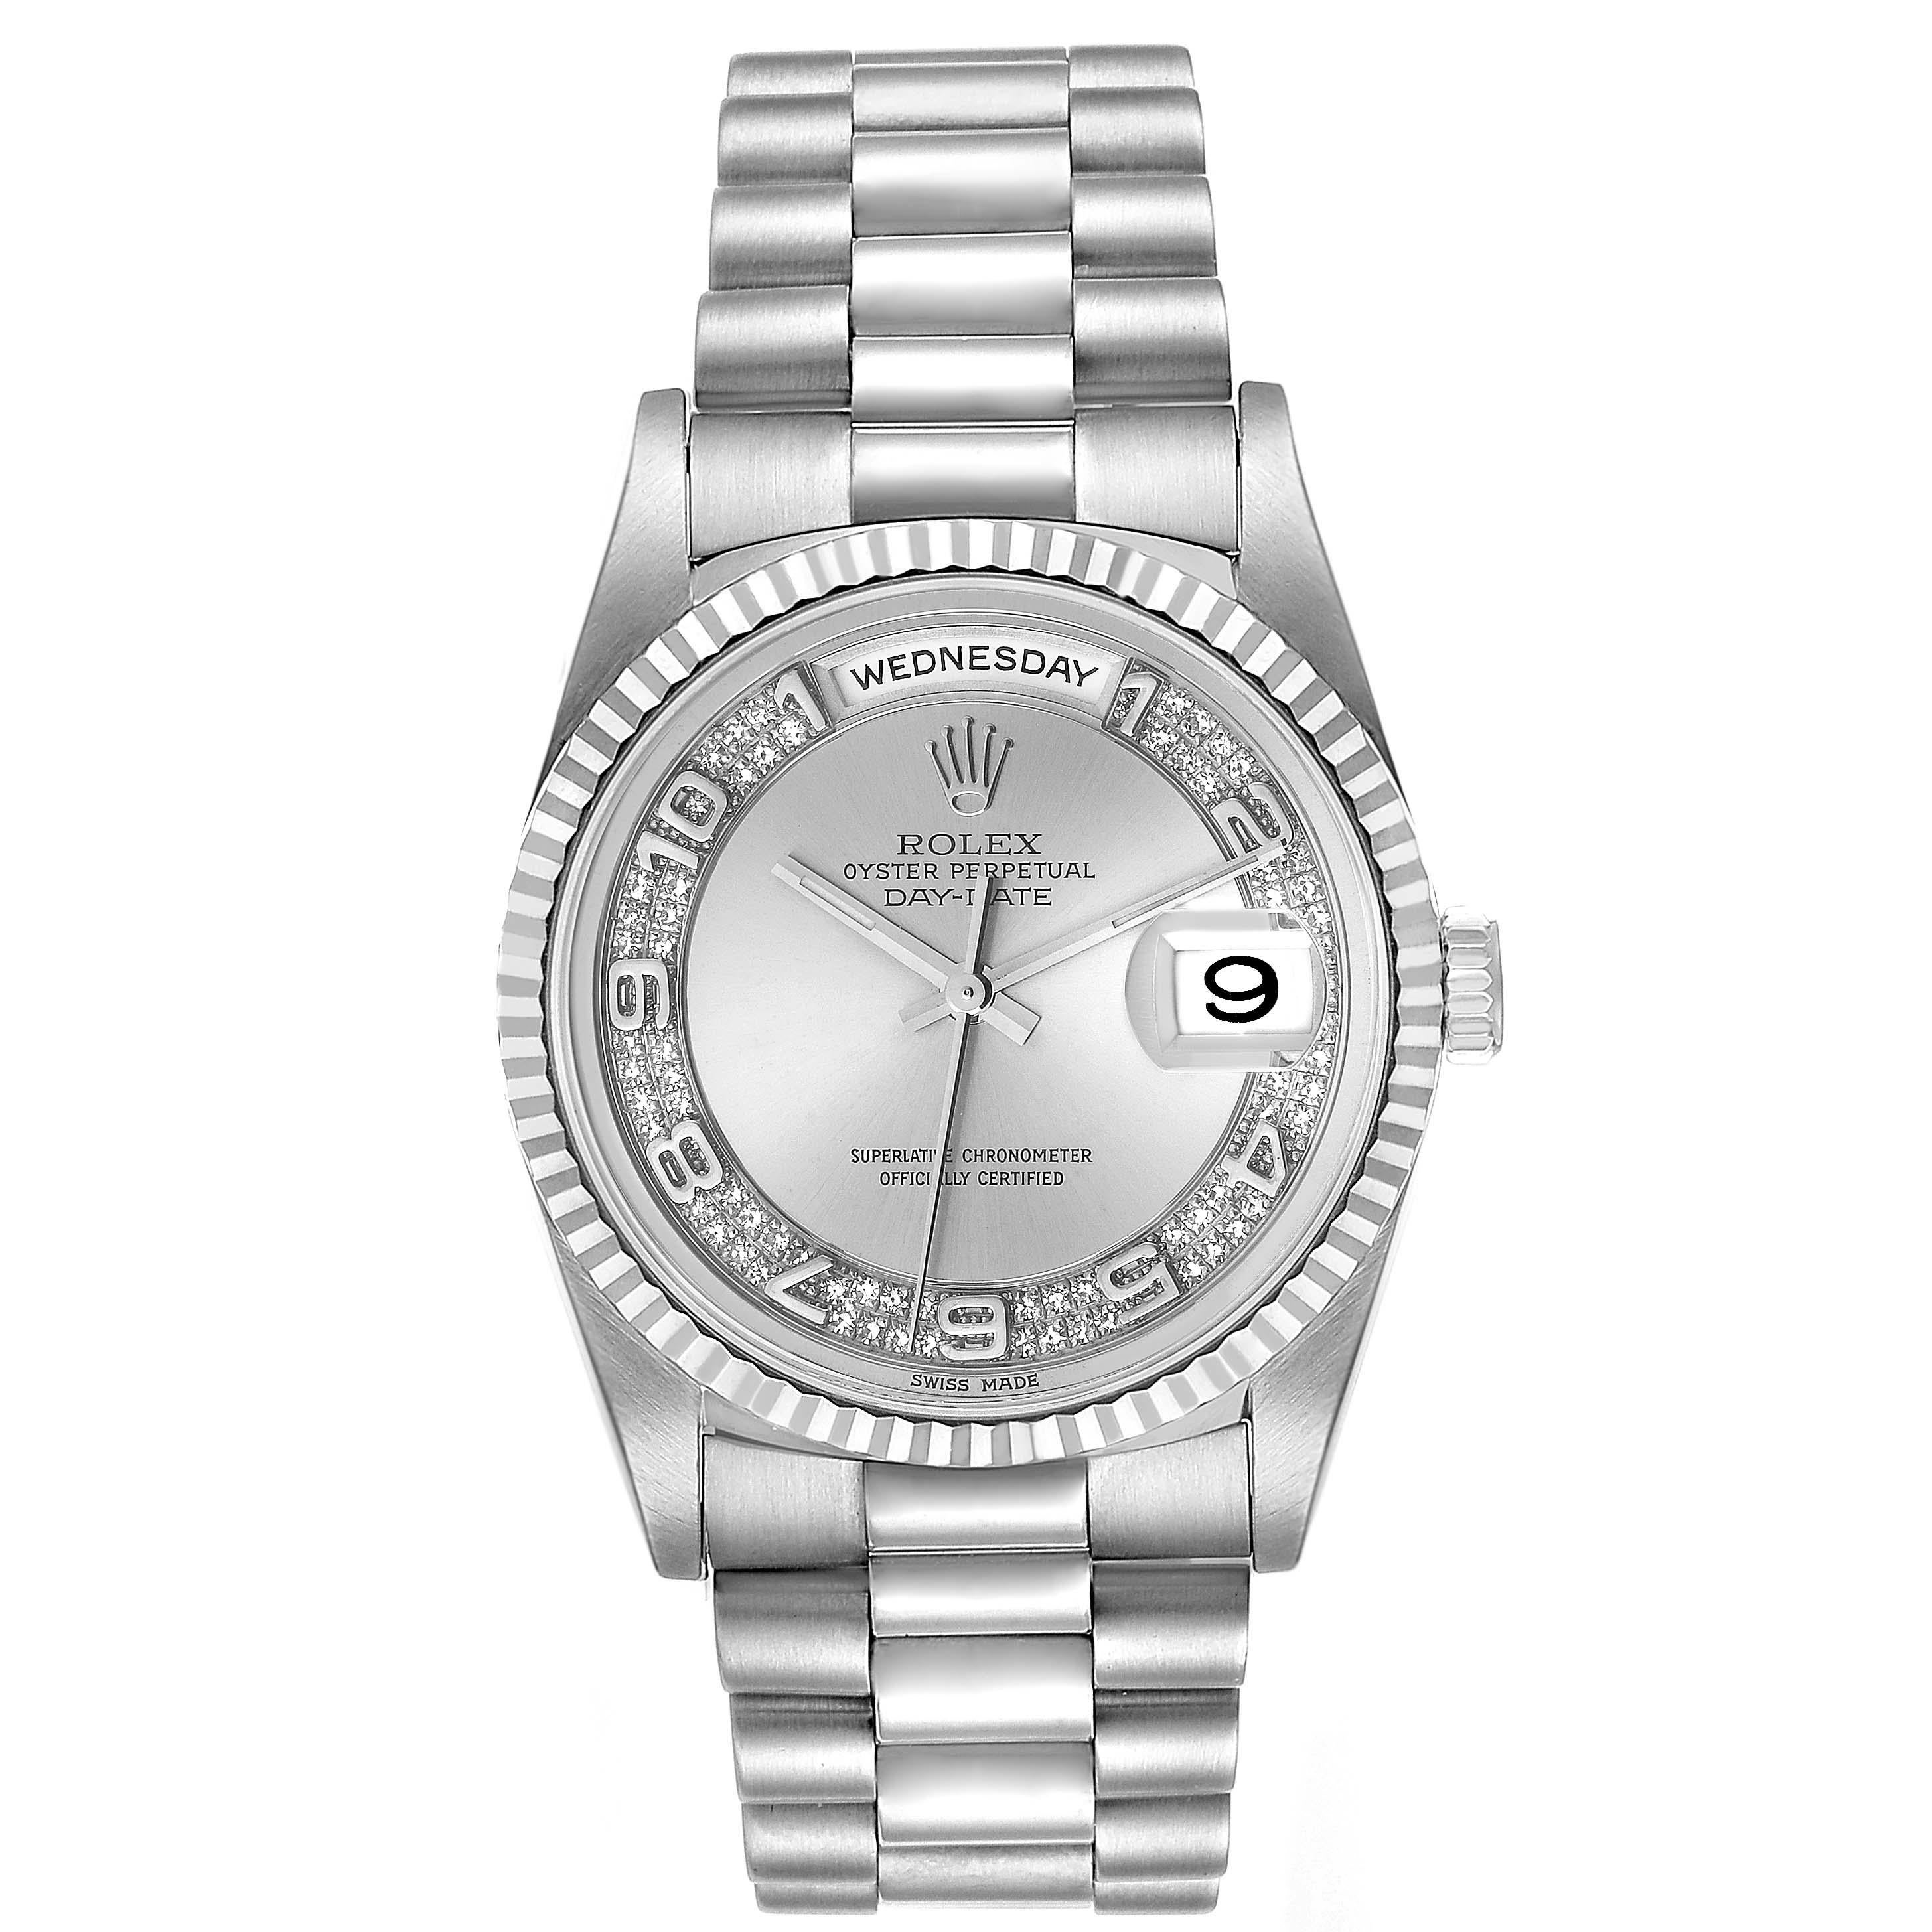 Rolex President Day-Date White Gold Myriad Diamond Dial Mens Watch 18239. Officially certified chronometer self-winding movement. 18k white gold oyster case 36.0 mm in diameter. Rolex logo on a crown. 18K white gold fluted bezel. Scratch resistant